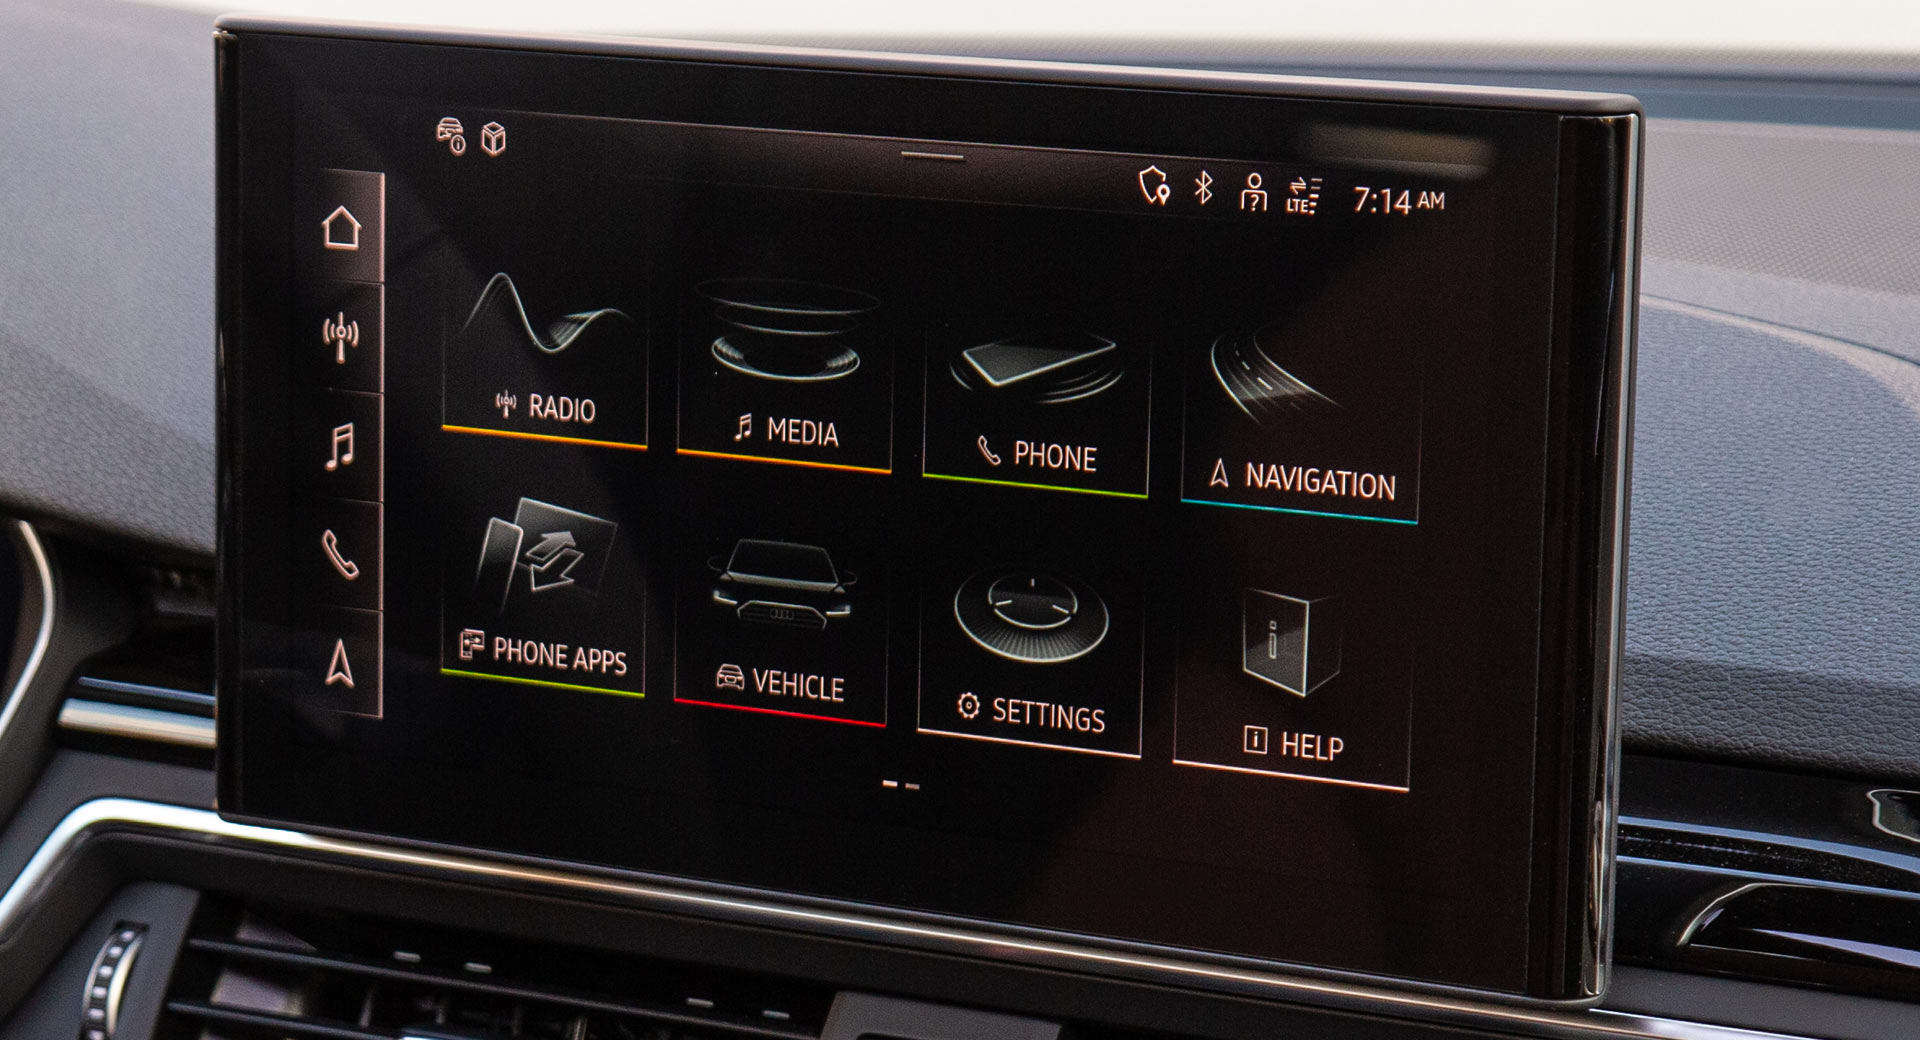 Audi Details New MIB 3 Infotainment System, Features Hybrid